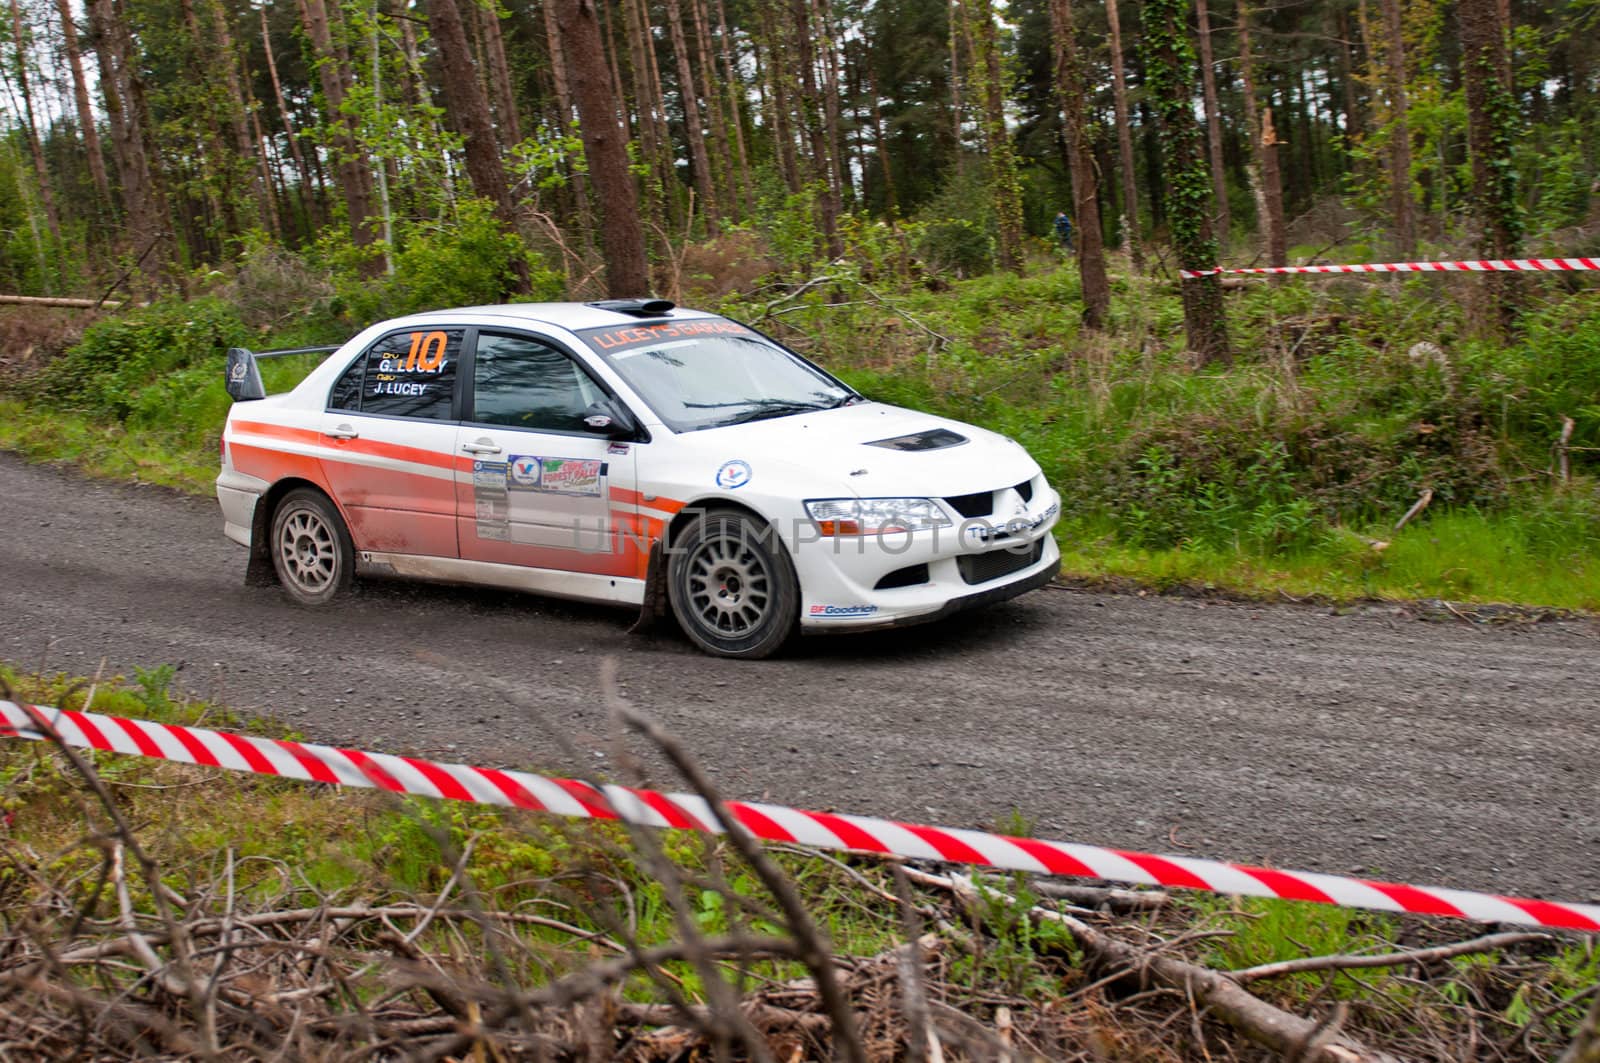 MALLOW, IRELAND - MAY 19: G. Lucey driving Mitsubishi Evo at the Jim Walsh Cork Forest Rally on May 19, 2012 in Mallow, Ireland. 4th round of the Valvoline National Forest Rally Championship.